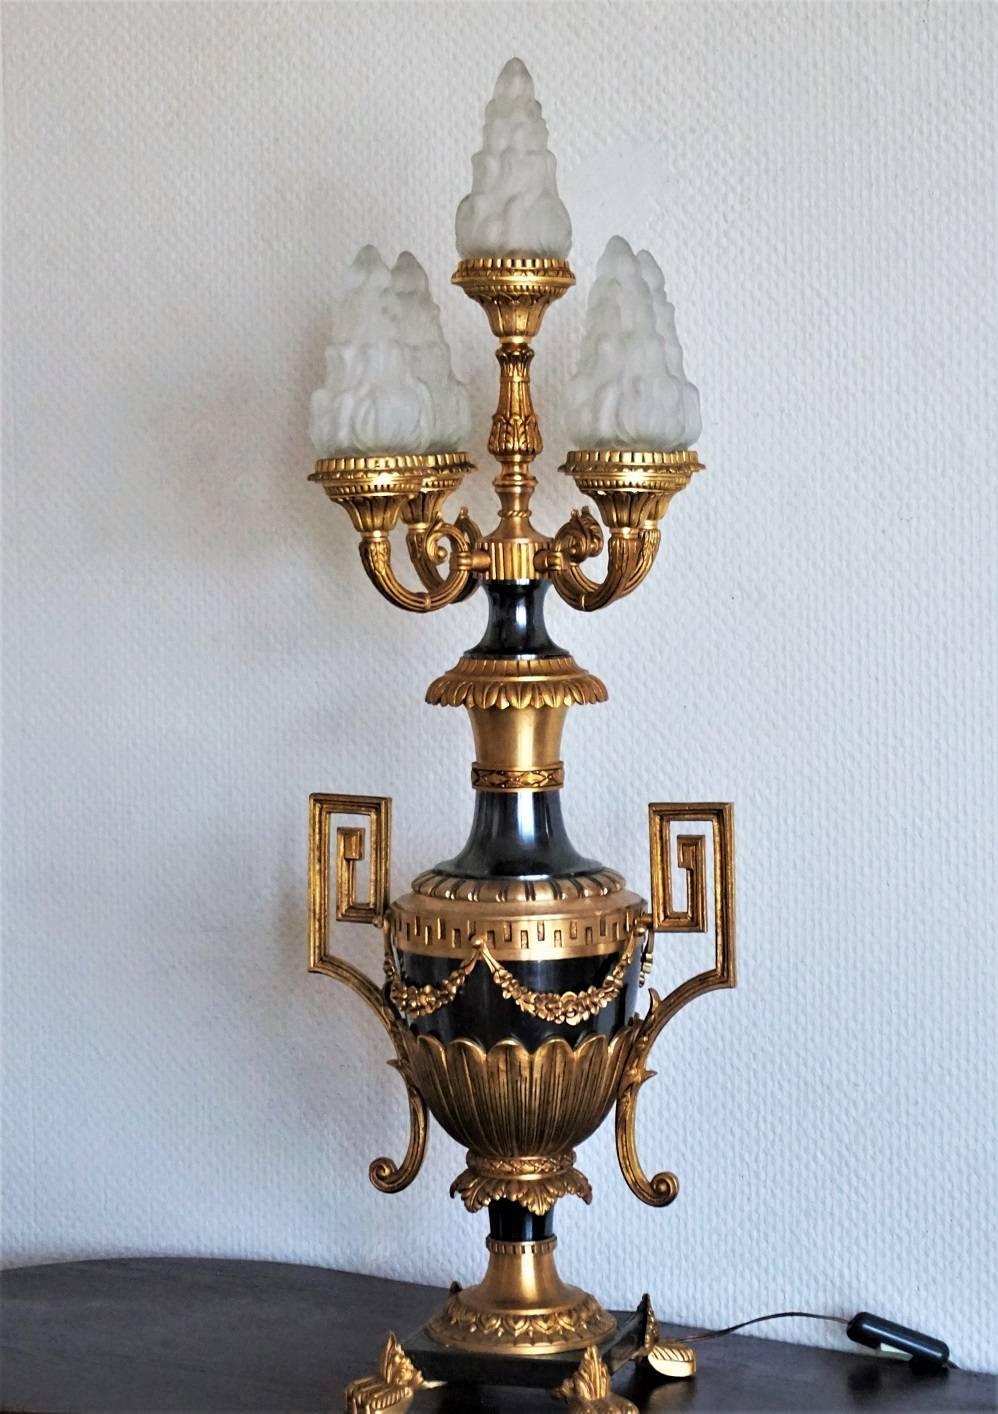 Large, heavy Empire style gilt and patinated bronze Amphora table lamp decorated with fine ornaments and garlands on a square base supported by four feet covered with leaves. Five-light with frosted glass flame shades.

Measures: Height: 33 in (83.5